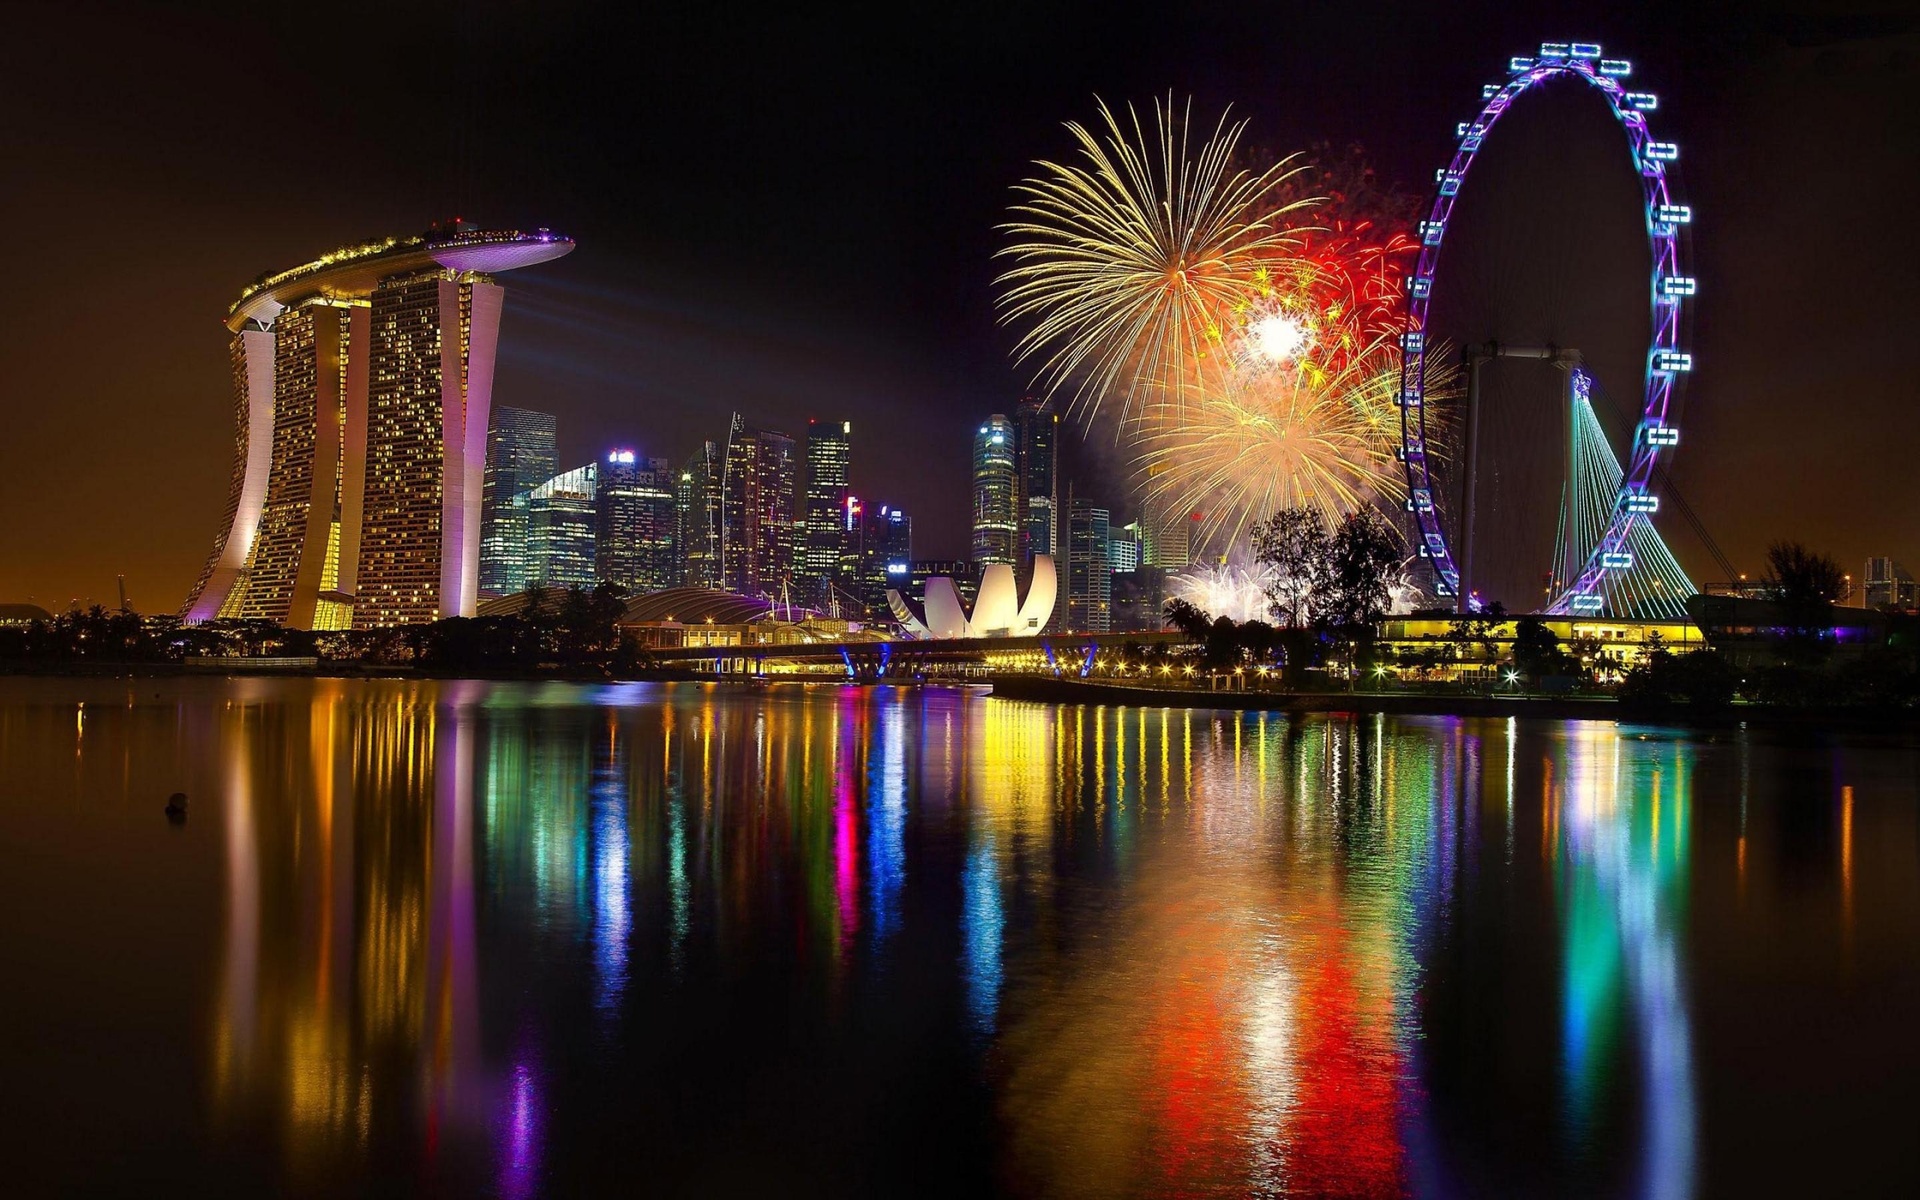 singapore, World, Architecture, Buildings, Skyscraper, Night, Lights, Sign, Neon, Fireworks, Holiday, Celebration, Festive, Lakes, Water, Pool, Reflection, Bay, Harbor, Ferris, Wheel, Color, Sky Wallpaper